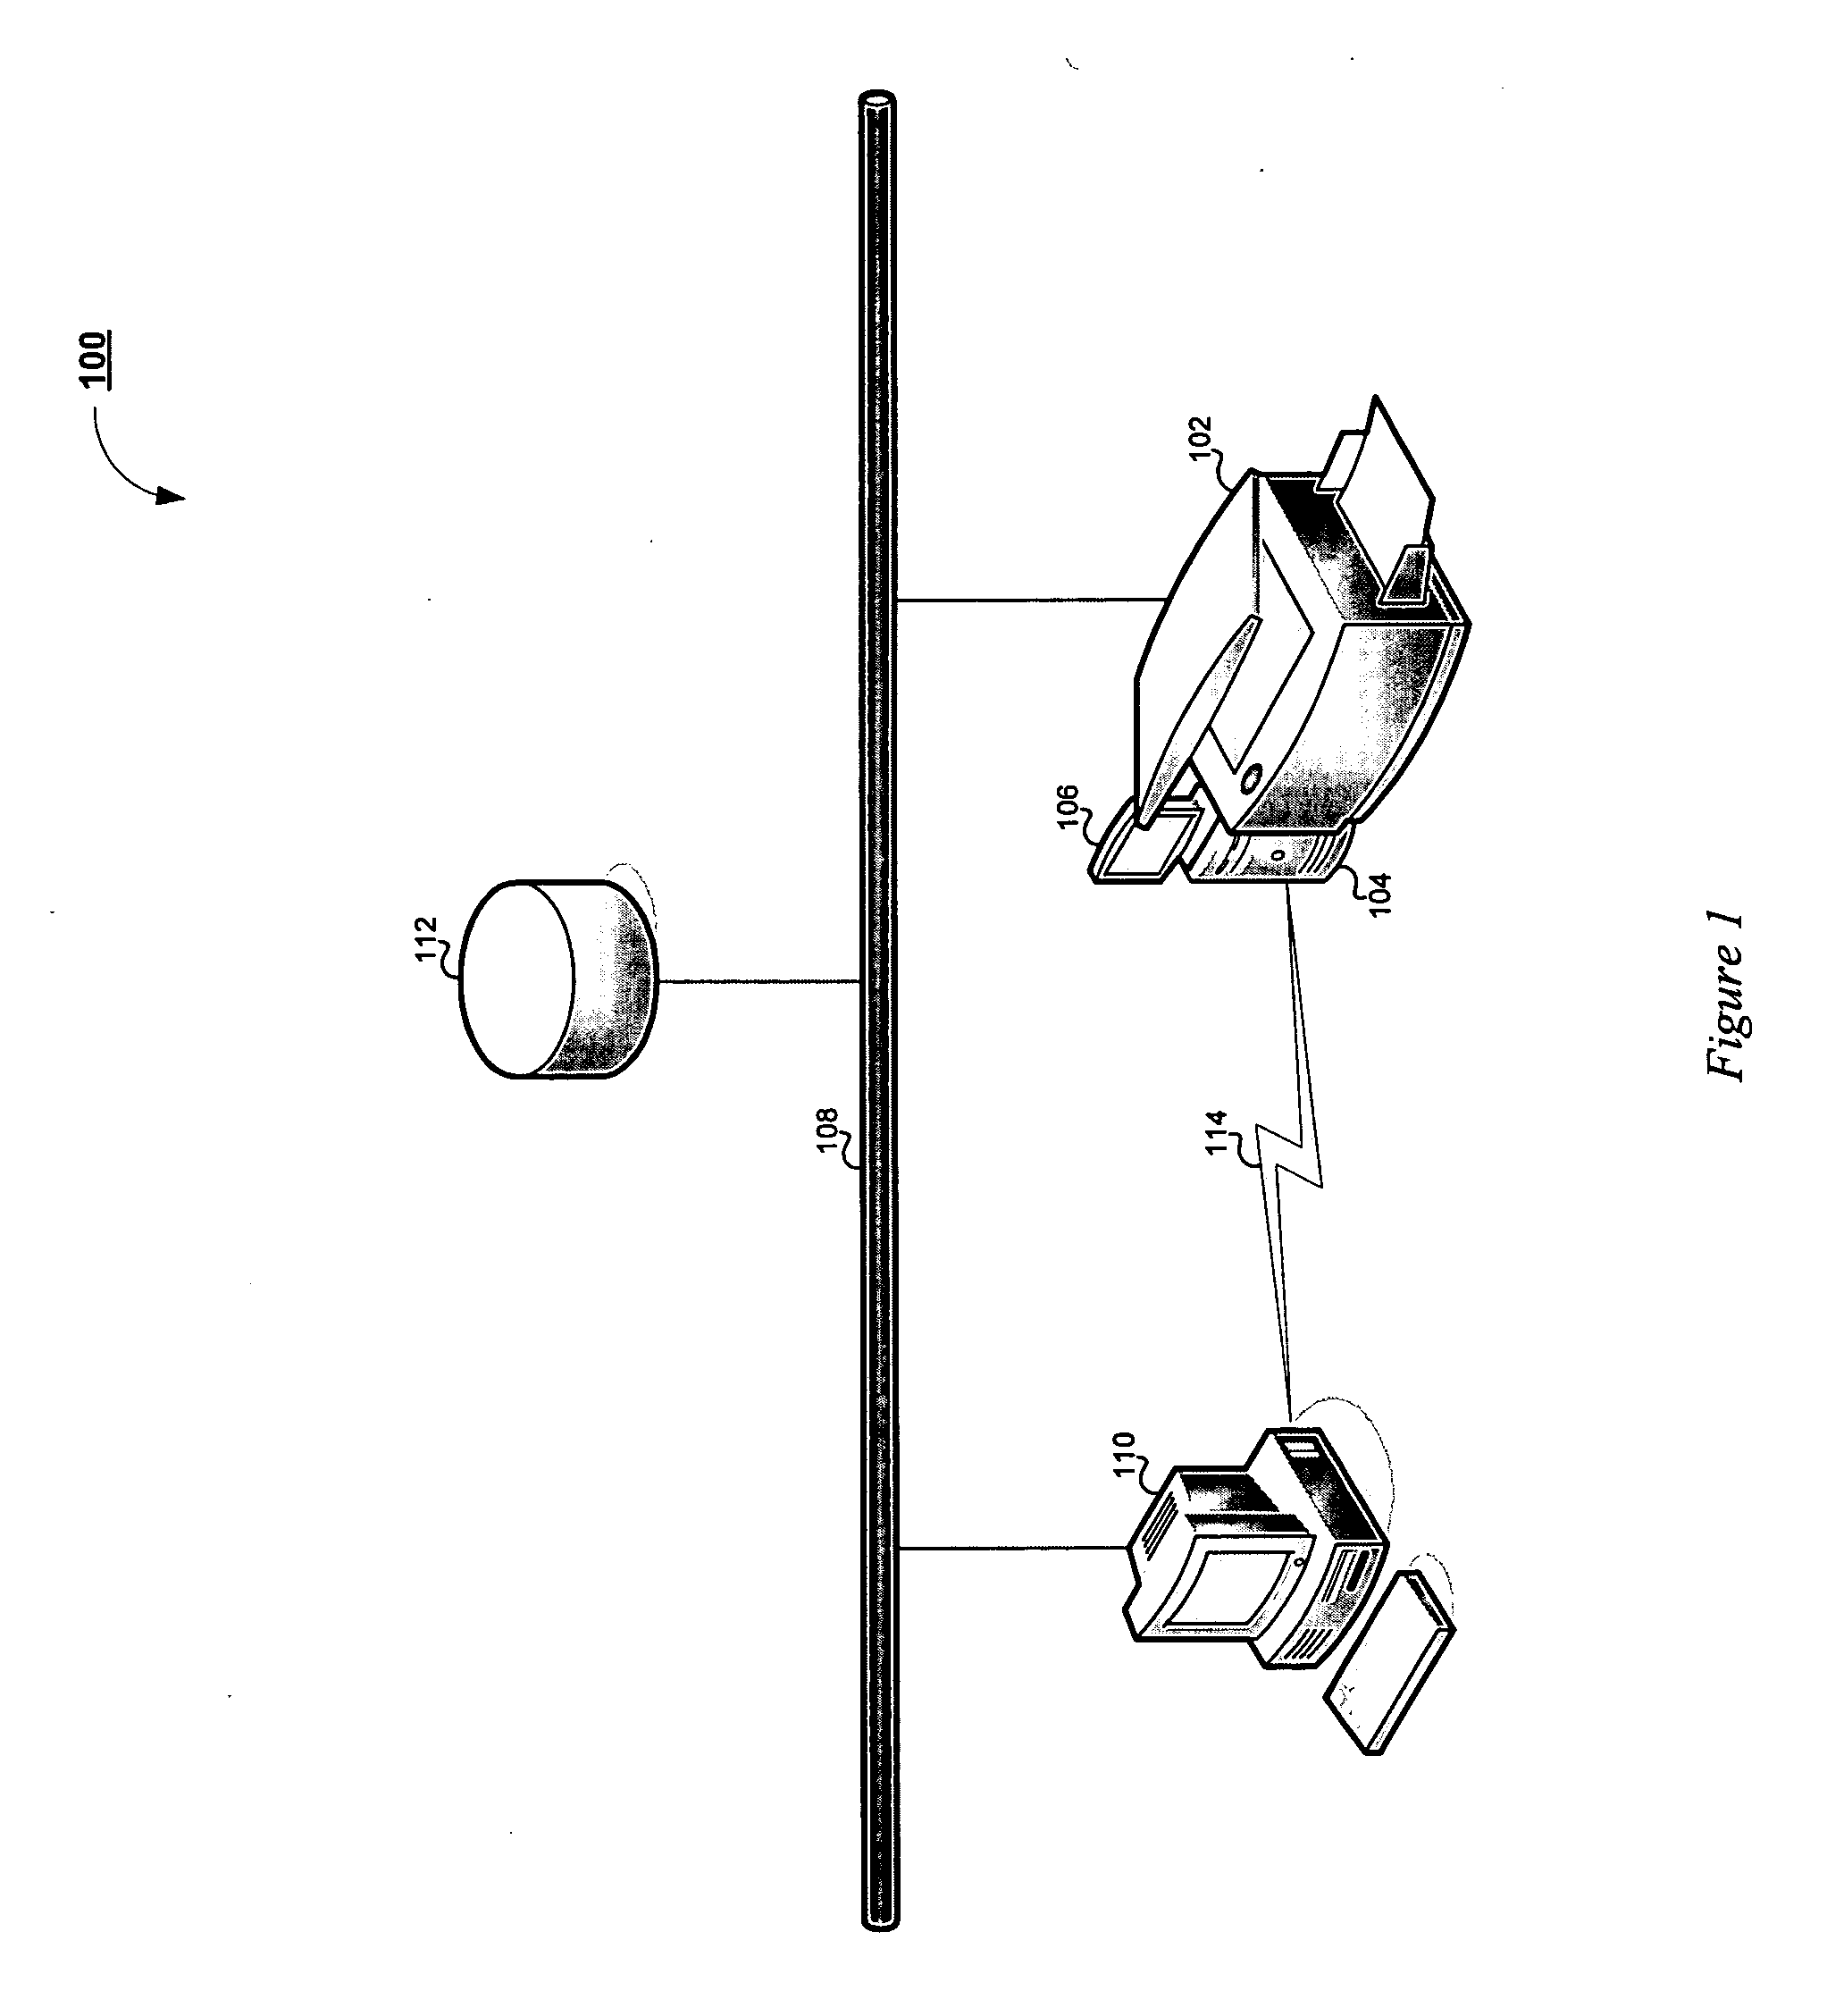 System and method for tracking feature usage in a document processing environment